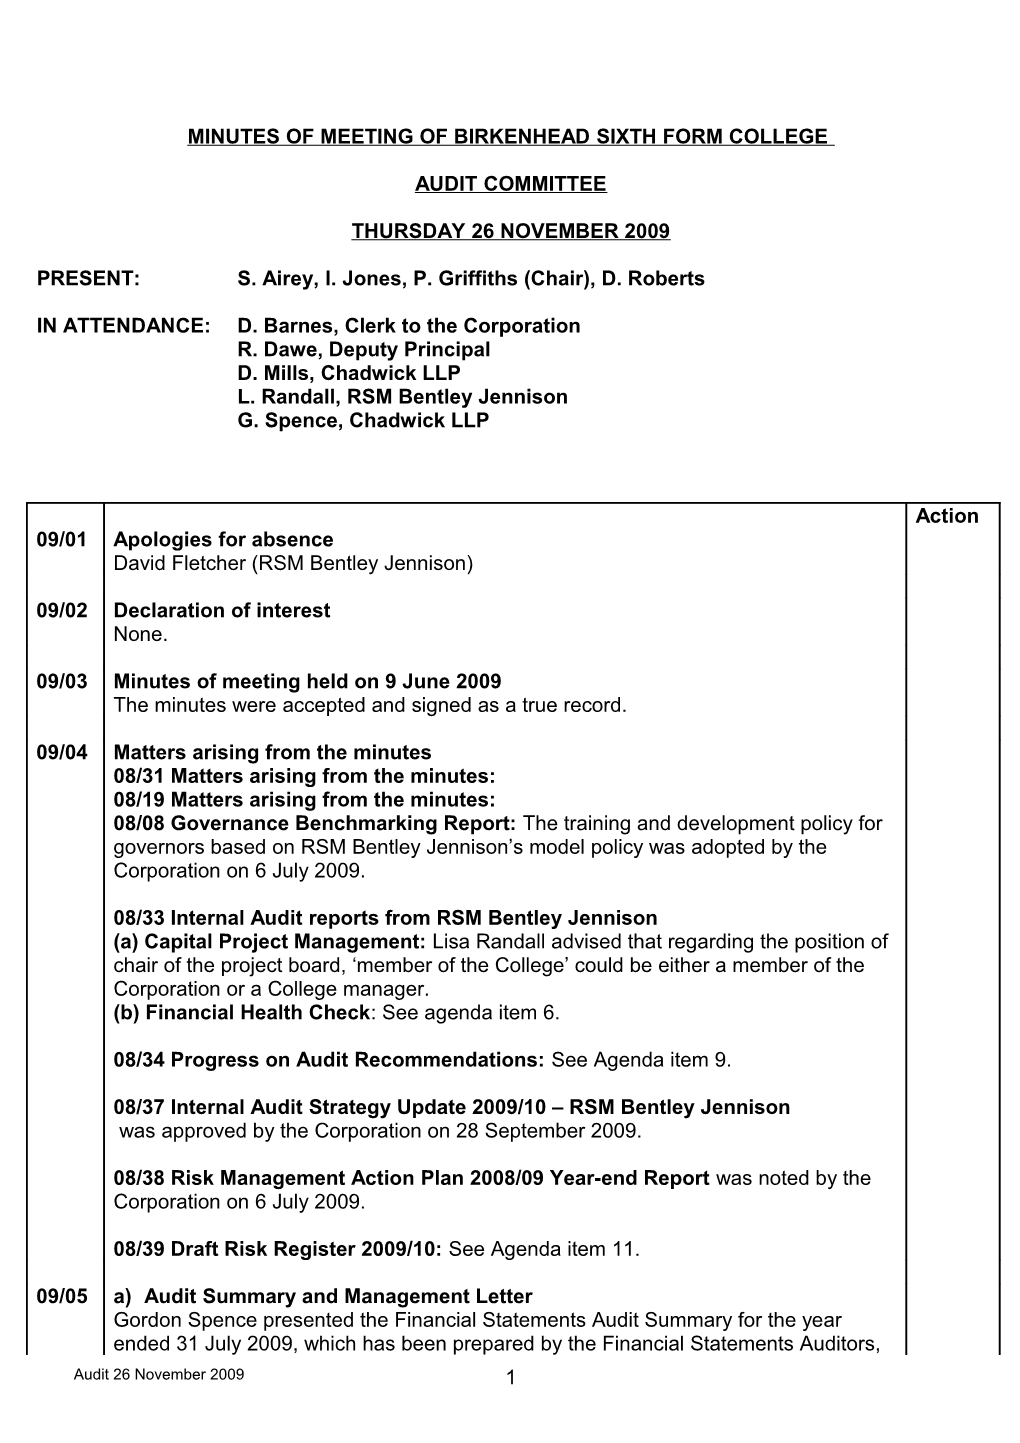 Minutes of the Meeting of Birkenhead Sixth Form College